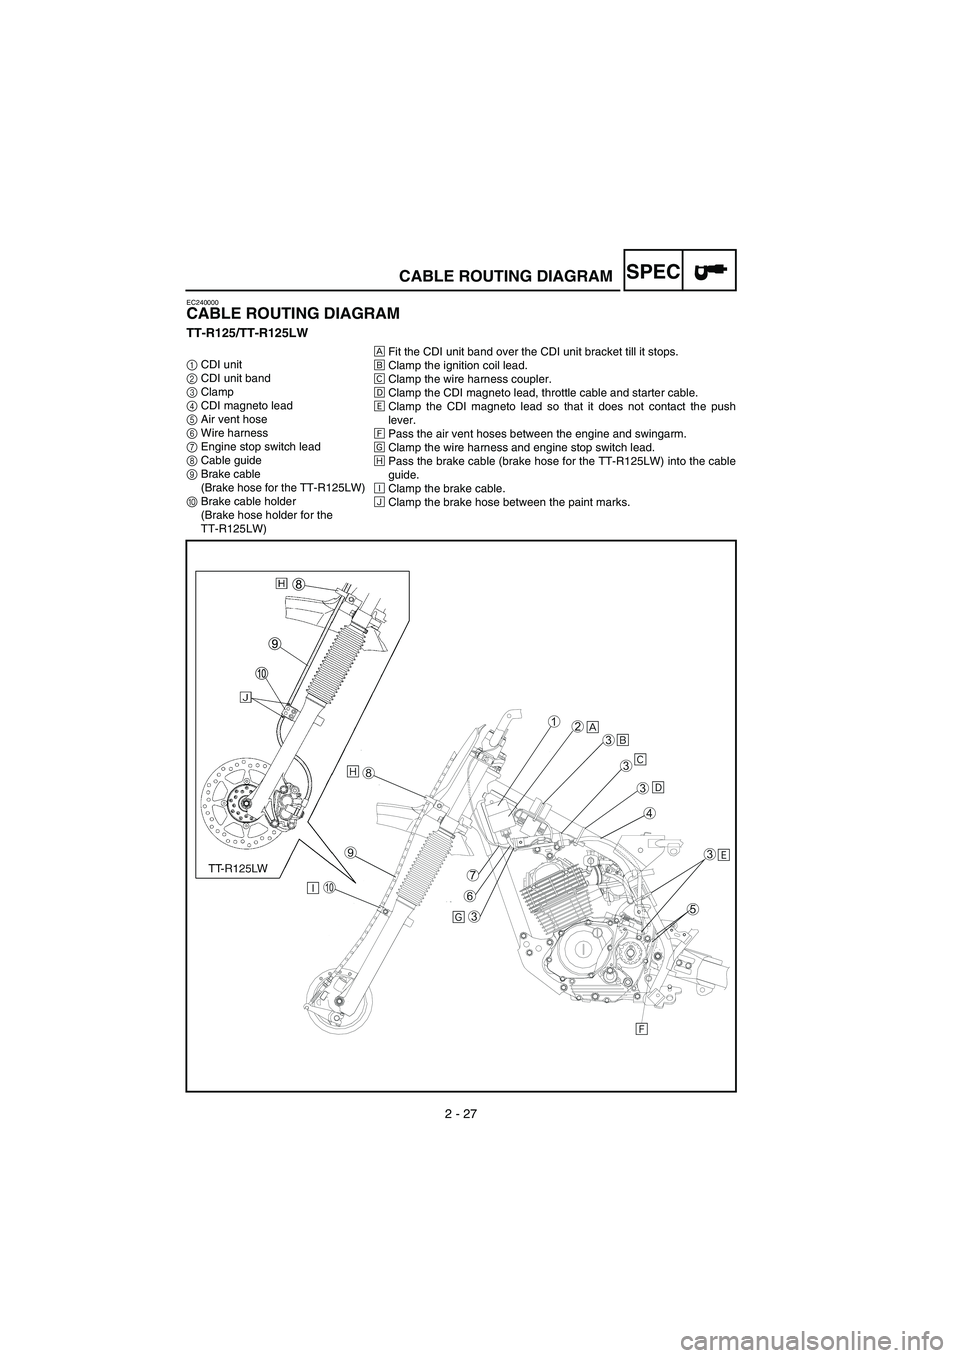 YAMAHA TTR125 2007  Betriebsanleitungen (in German) 152 - A - V
2 - 27
SPEC
EC240000
CABLE ROUTING DIAGRAM
TT-R125/TT-R125LW
1 CDI unit
2  CDI unit band
3  Clamp
4  CDI magneto lead
5  Air vent hose
6  Wire harness
7  Engine stop switch lead
8  Cable g